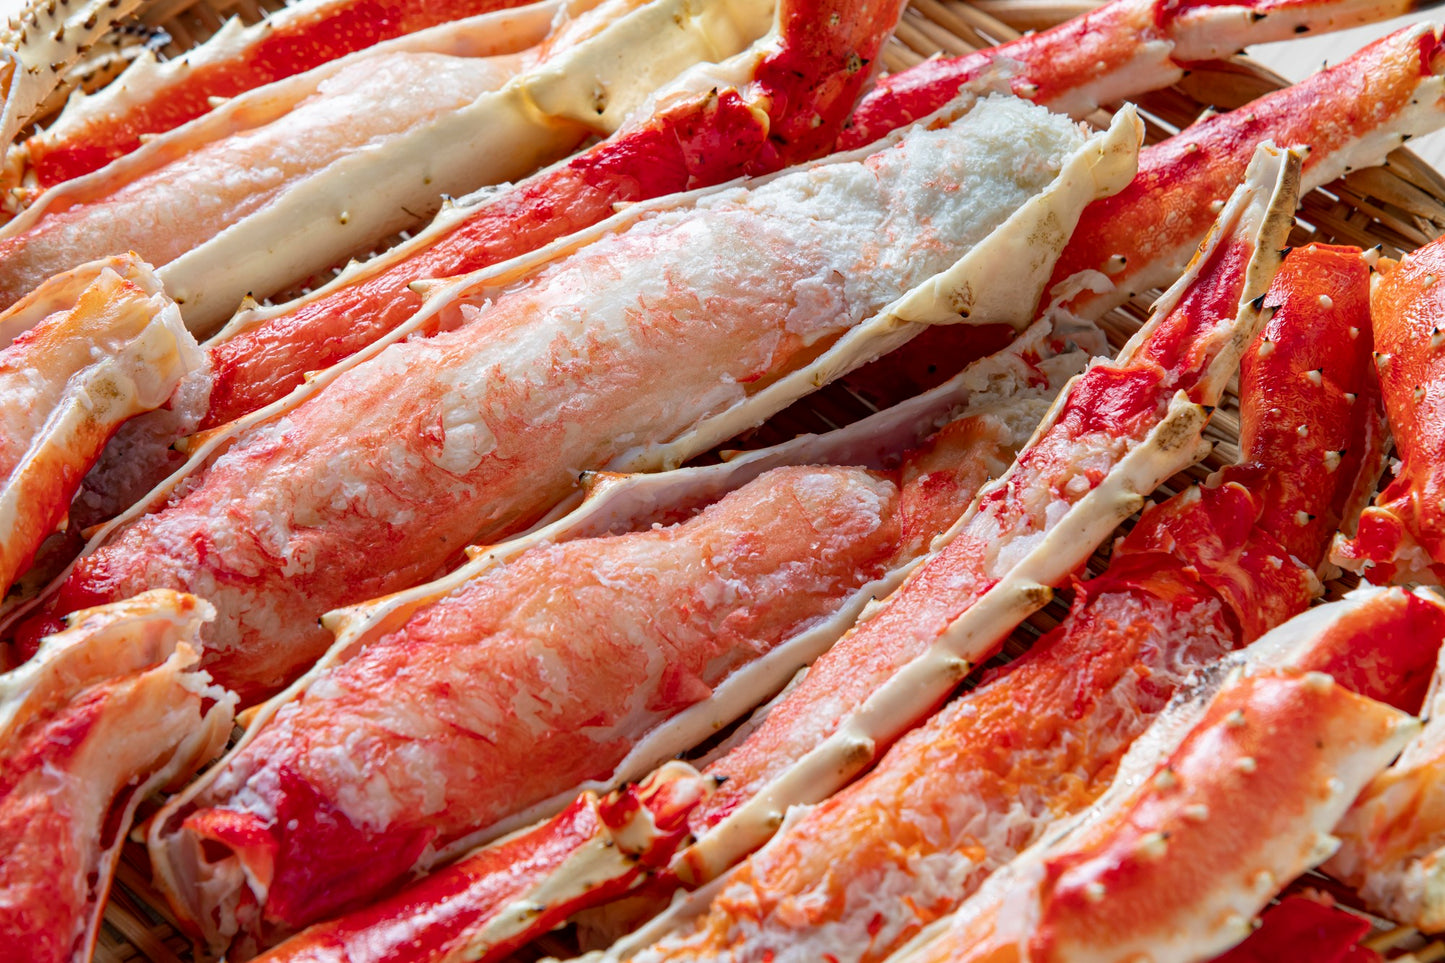 8 extra large boiled king crab legs with shoulders (approx. 2kg)